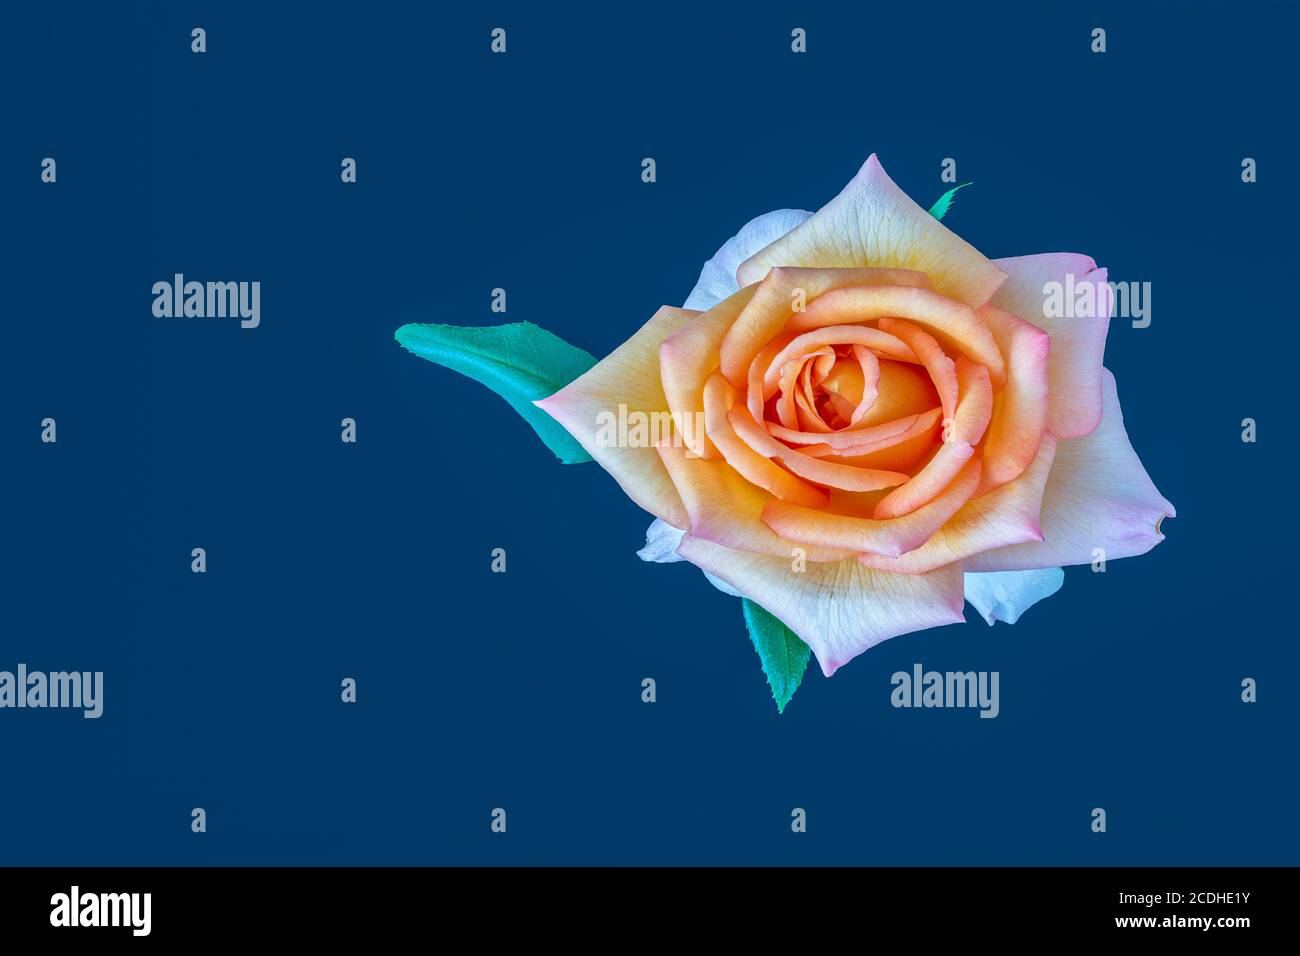 pink orange white yellow rose blossom with leaf macro on blue background in pop-art painting style Stock Photo